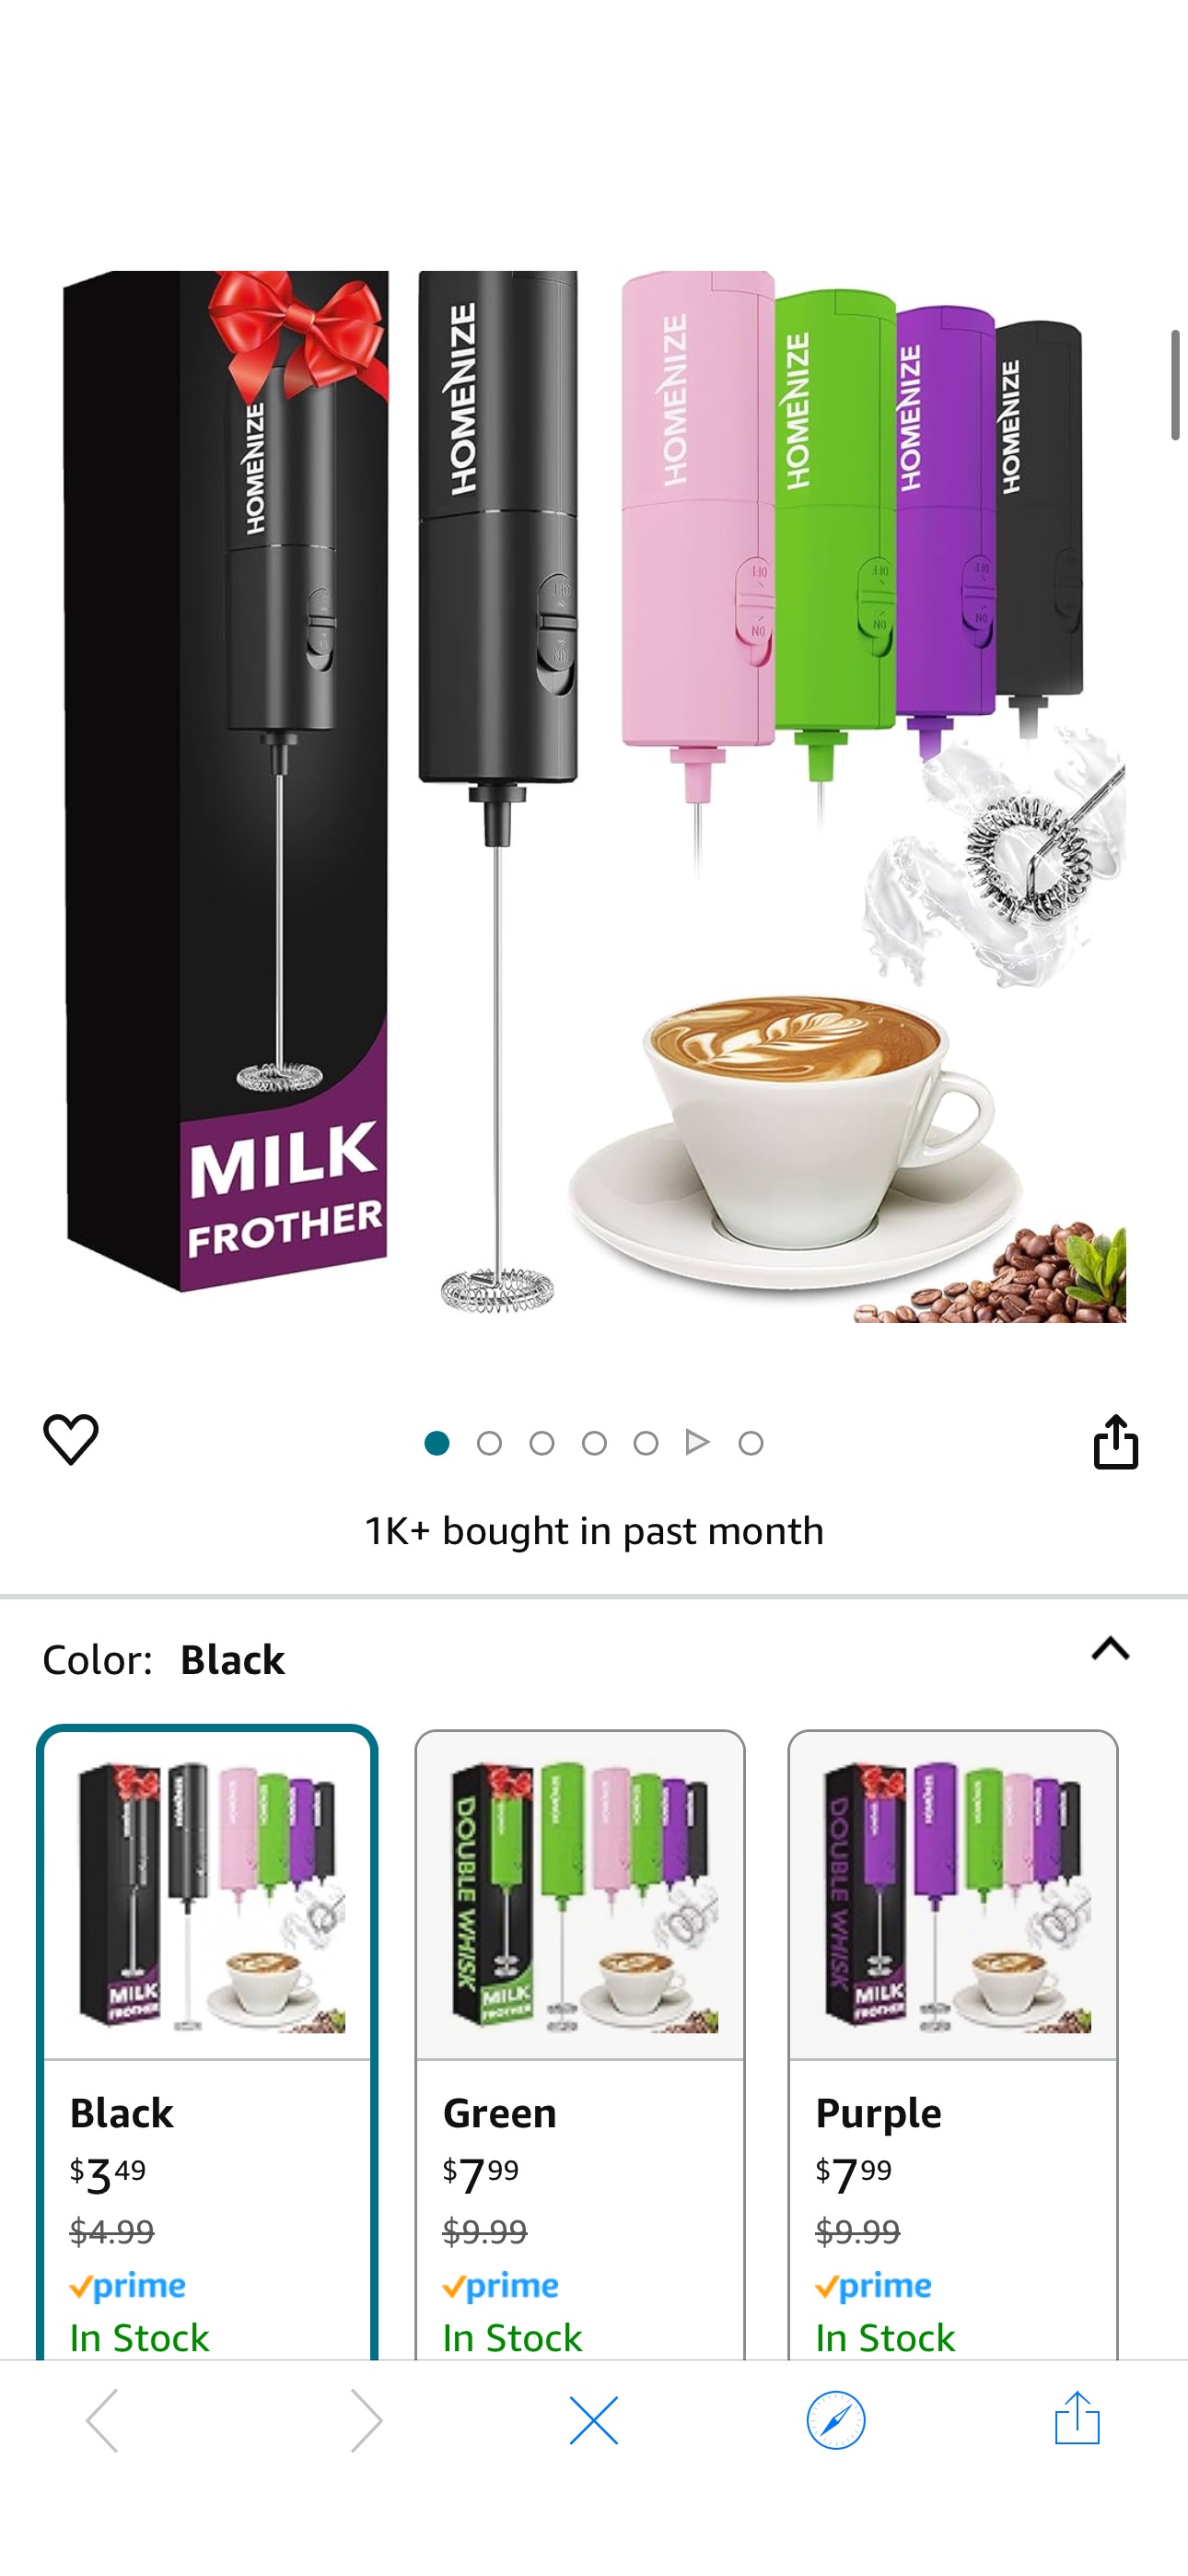 Amazon.com: Matcha Whisk,Milk Frother,Frother For Coffee Foam Maker for Lattes - Whisk Drink Mixer for Coffee, Mini Foamer for Cappuccino, Frappe, Matcha, Hot Chocolate: Home & Kitchen